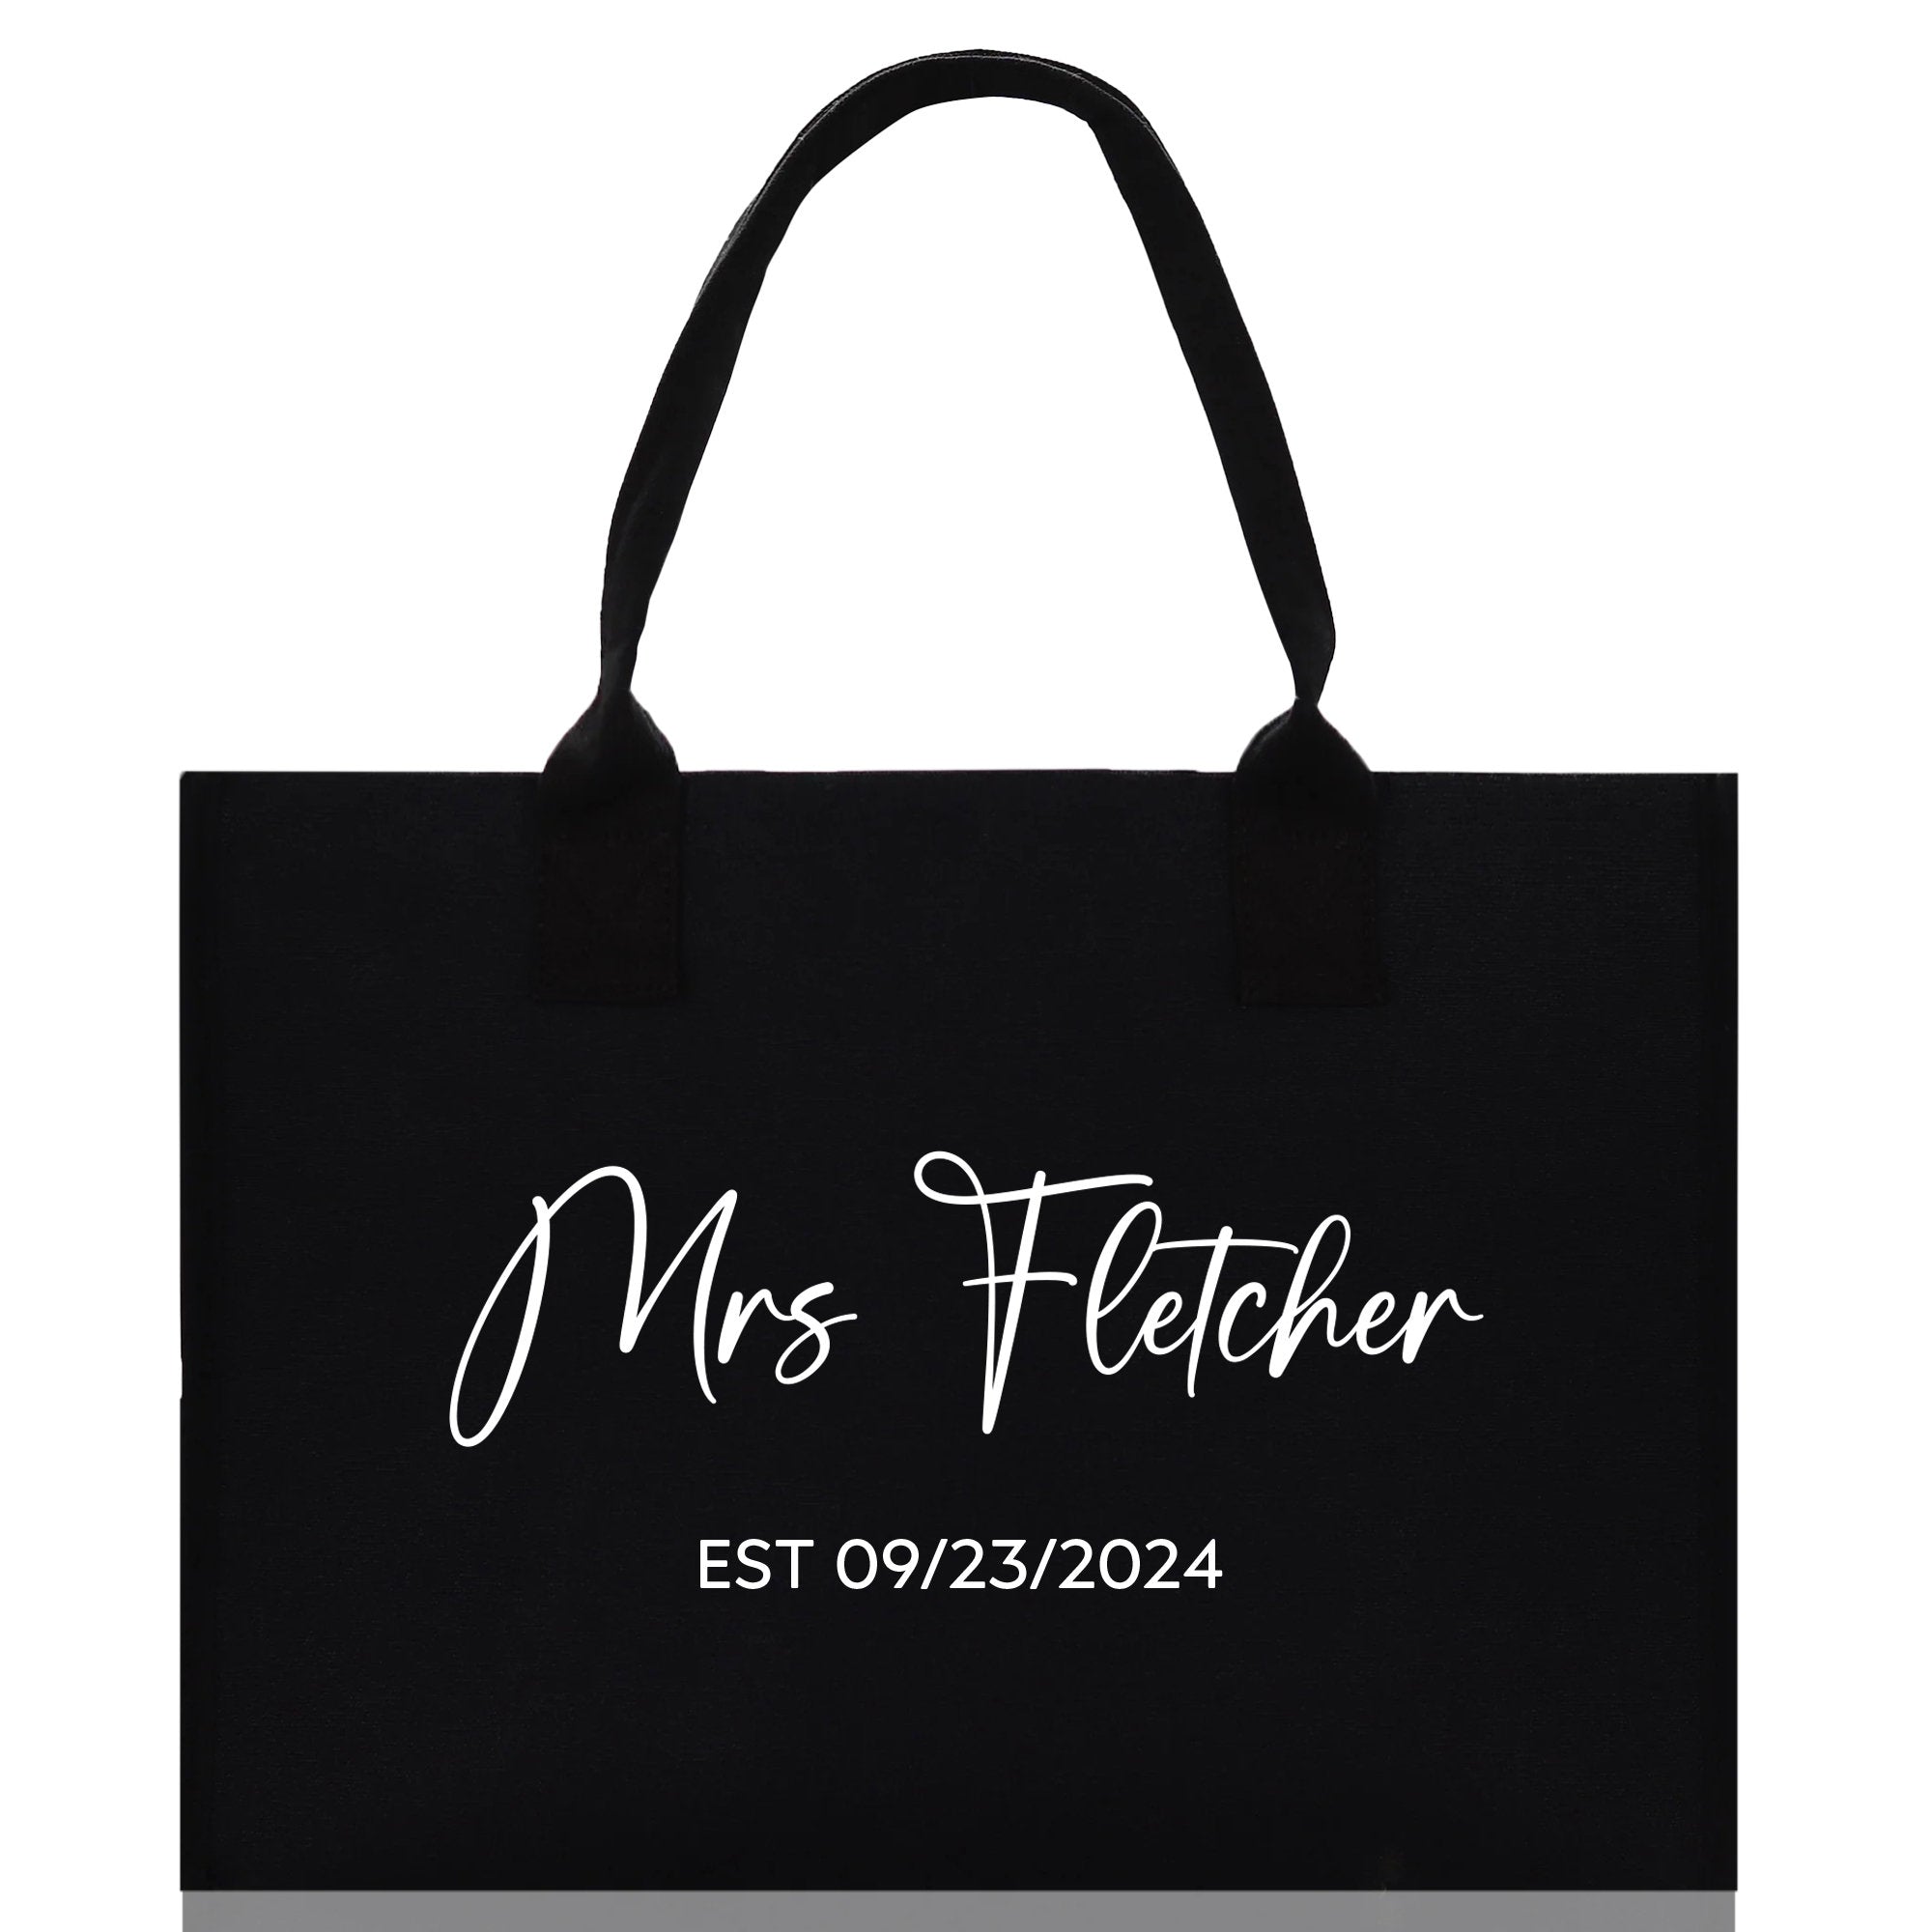 a black tote bag with the words mrs fetcher on it